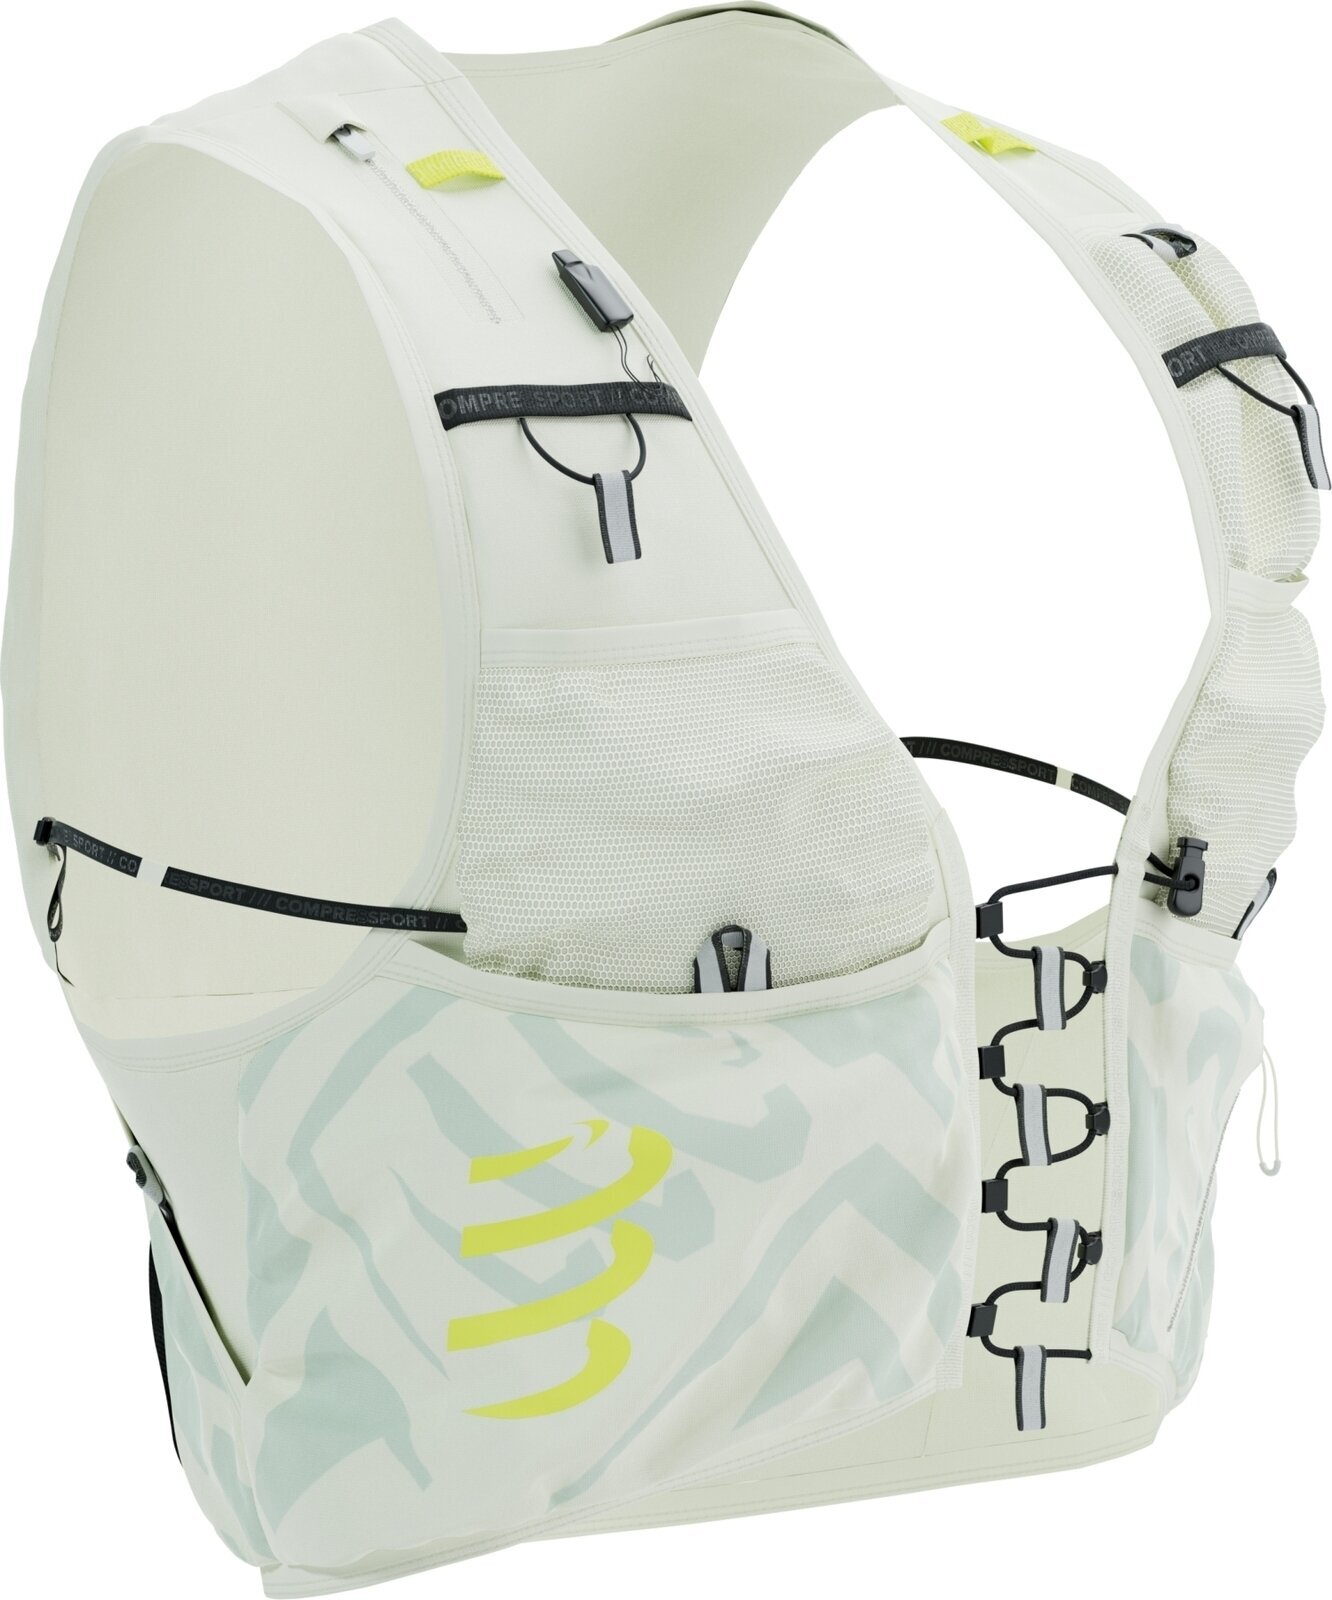 Running backpack Compressport UltRun S Pack Evo 10 Sugar Swizzle/Ice Flow/Safety Yellow XL Running backpack